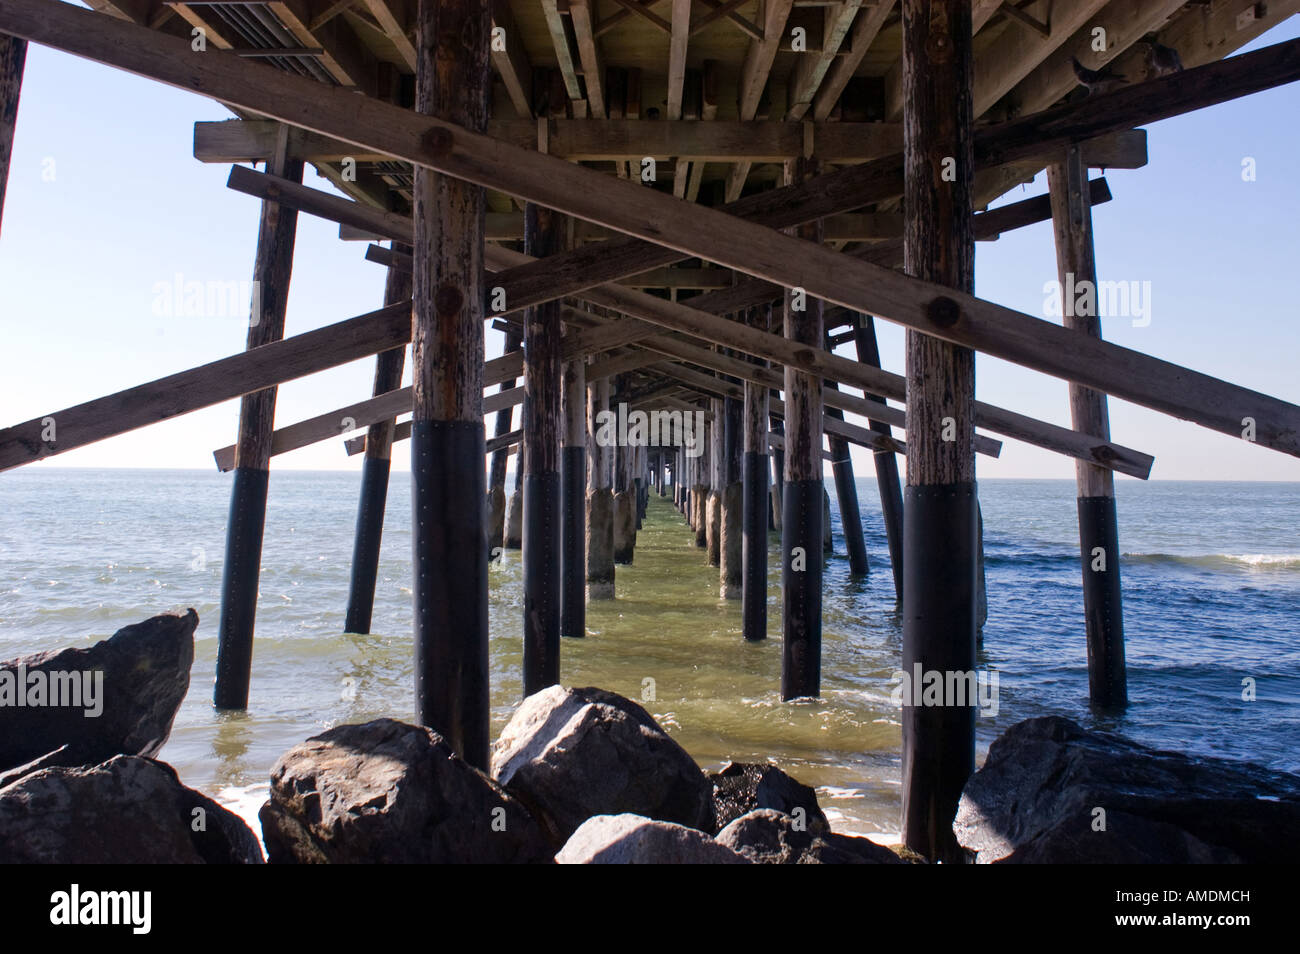 Looking out to sea through the pylons of a pier in California Stock Photo